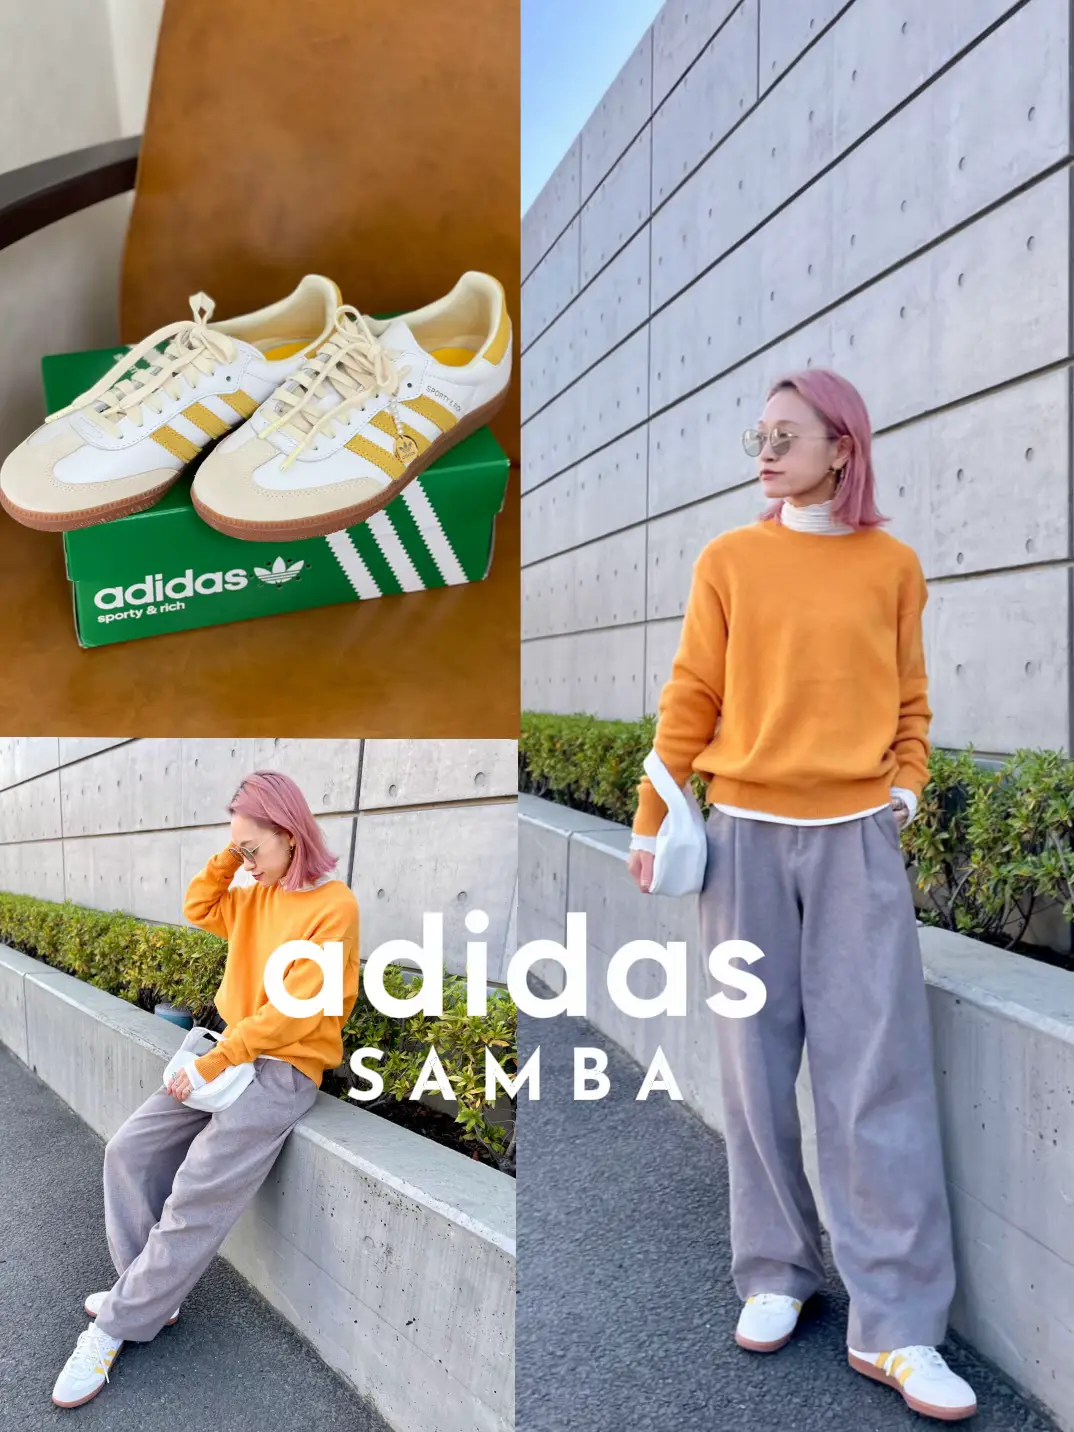 Adidas Samba is a must buy ❣️ Check out member-limited items